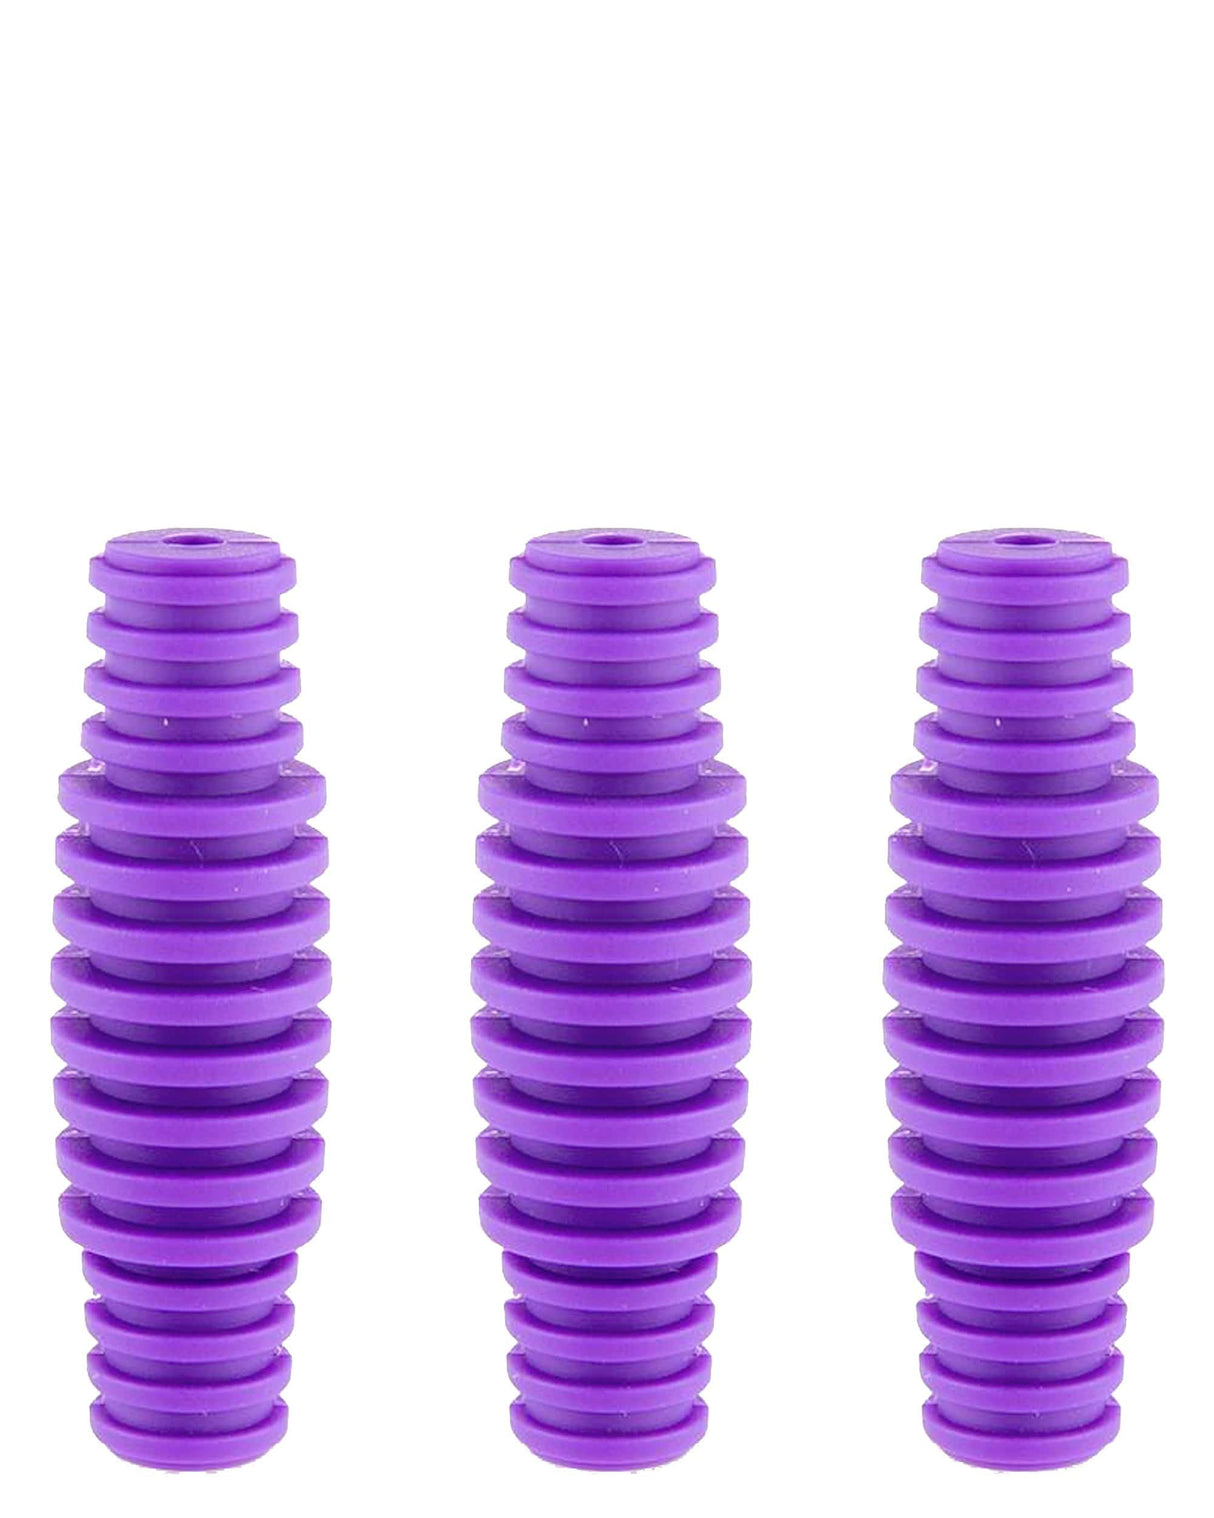 Three Ooze Banger Hanger Silicone Stands in purple, front view, for 14mm and 18mm bangers